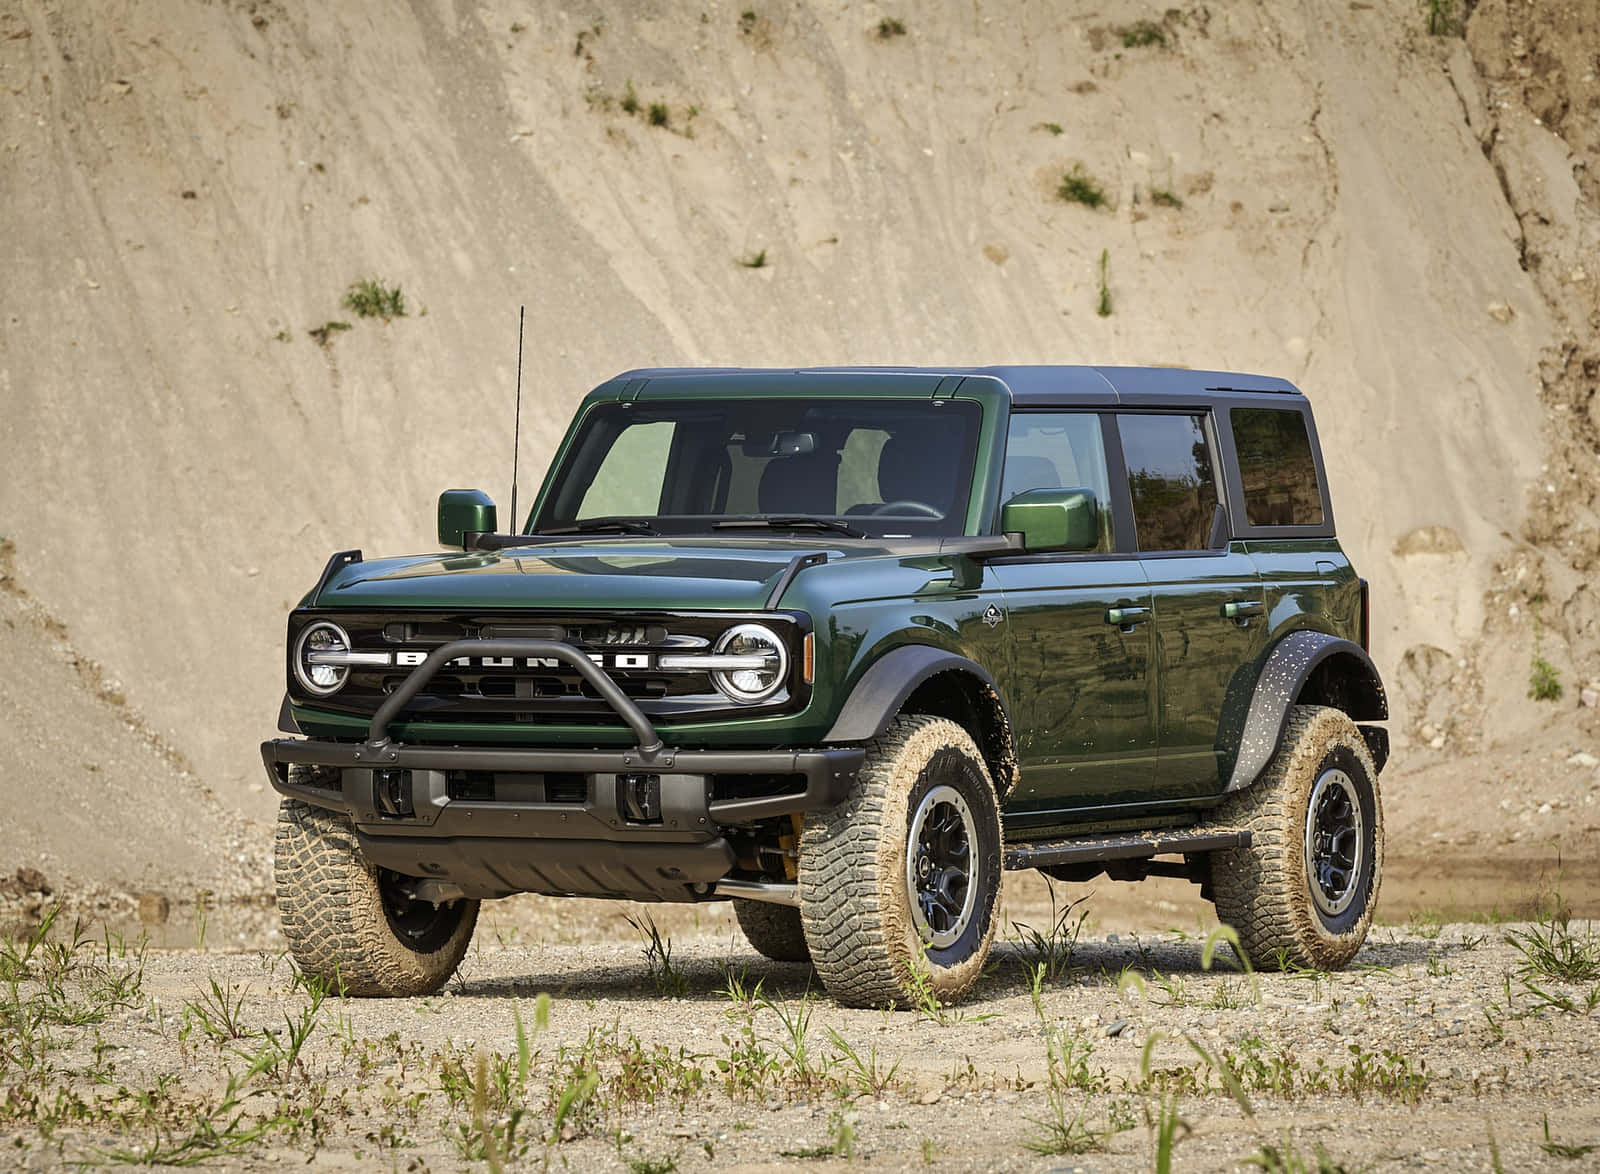 The Green Ford Bronco Is Parked In A Dirt Field